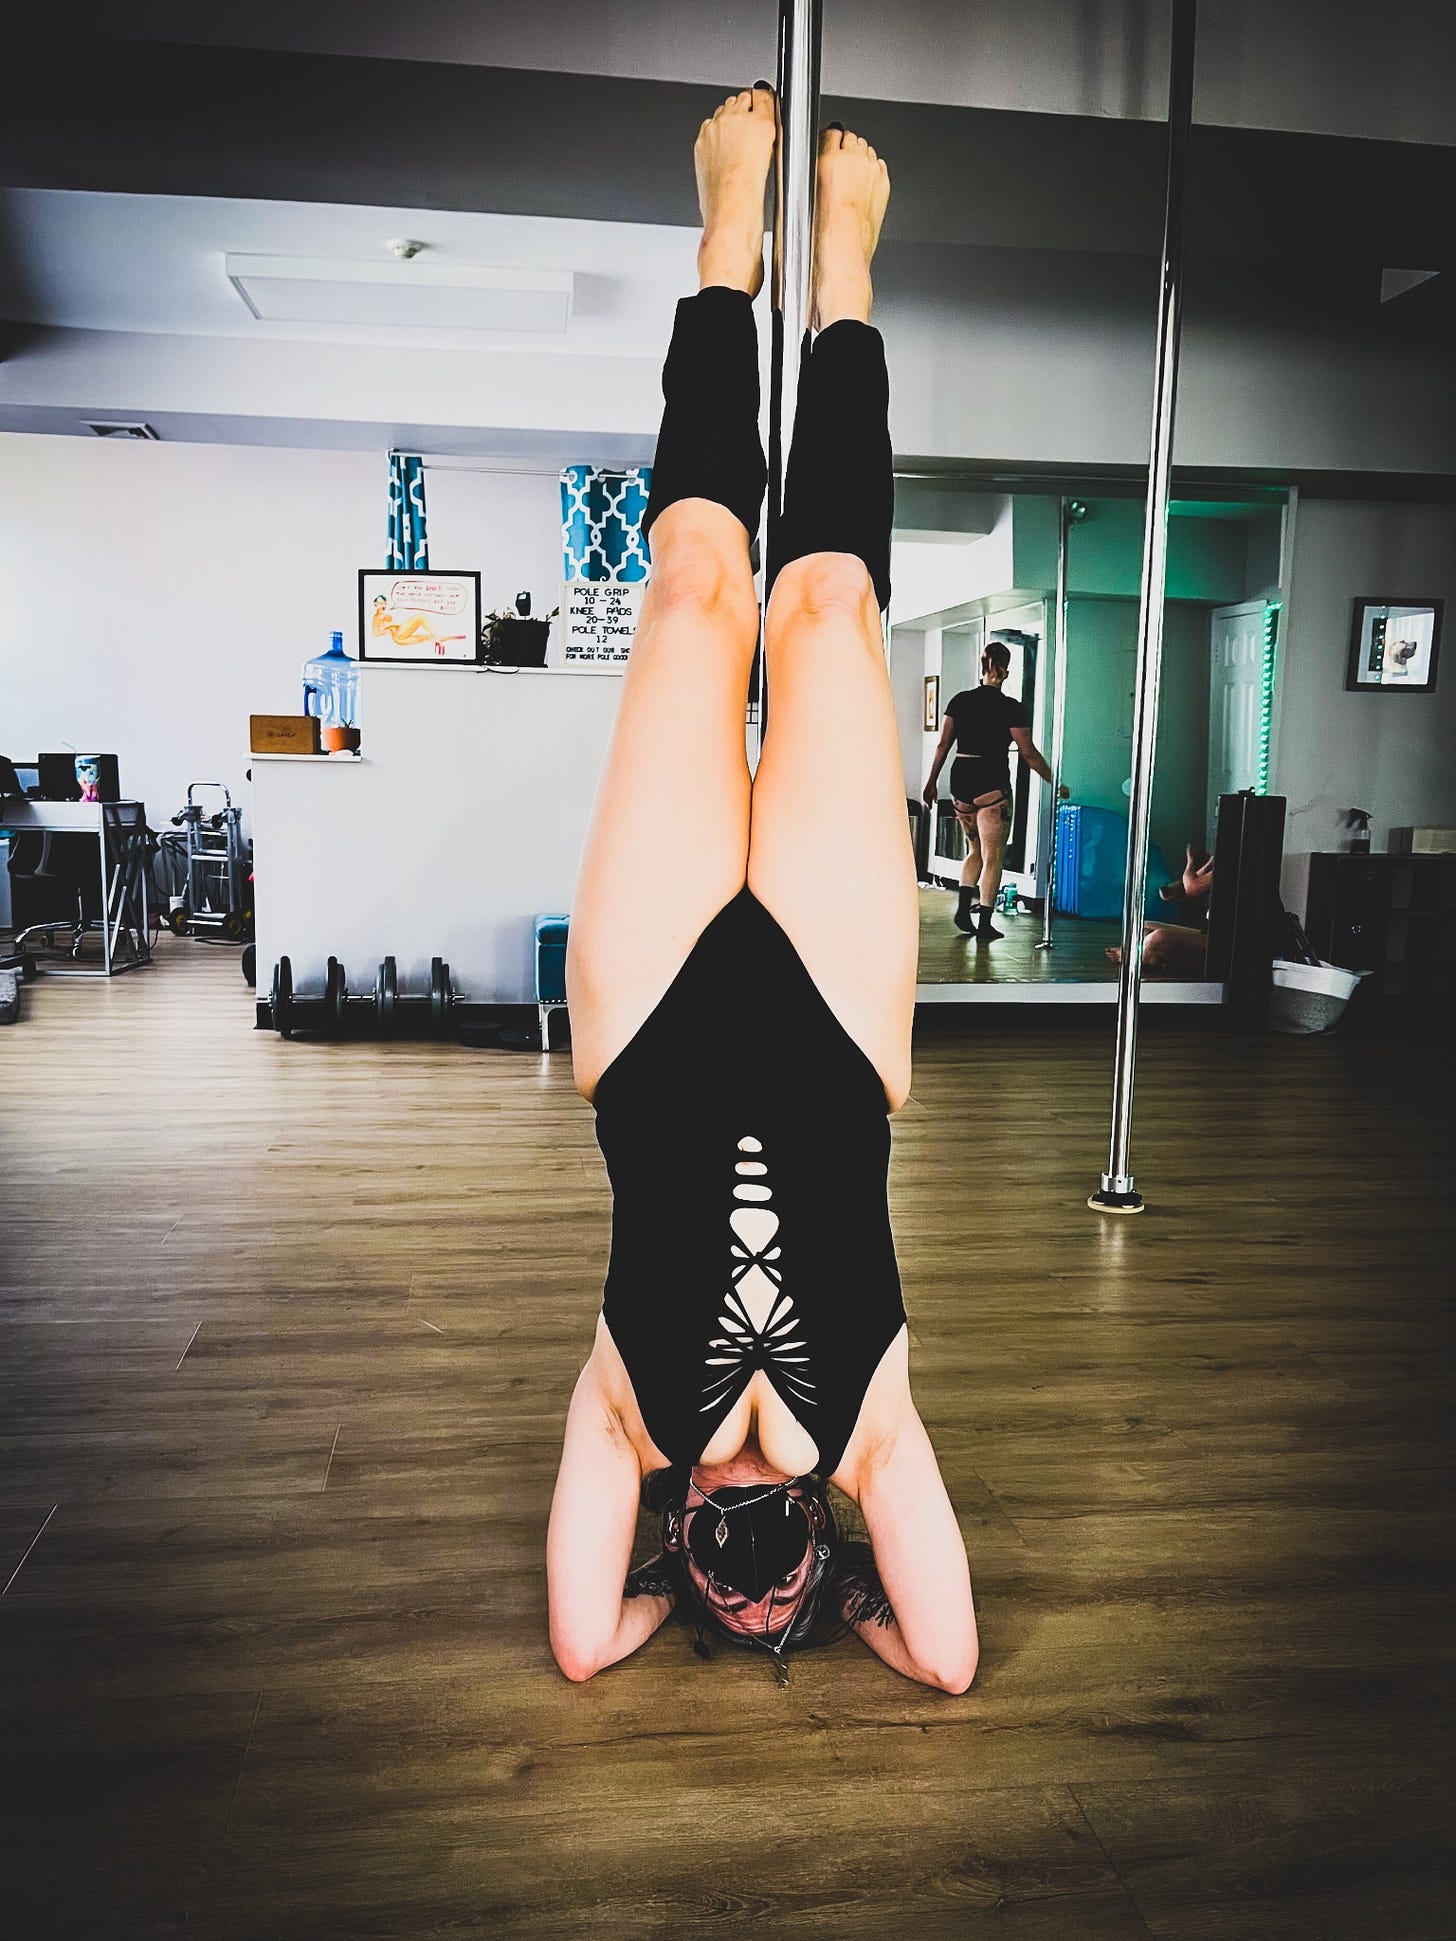 Woman doing headstand with a pole wearing a black leotard black leg warmers and a black face mask